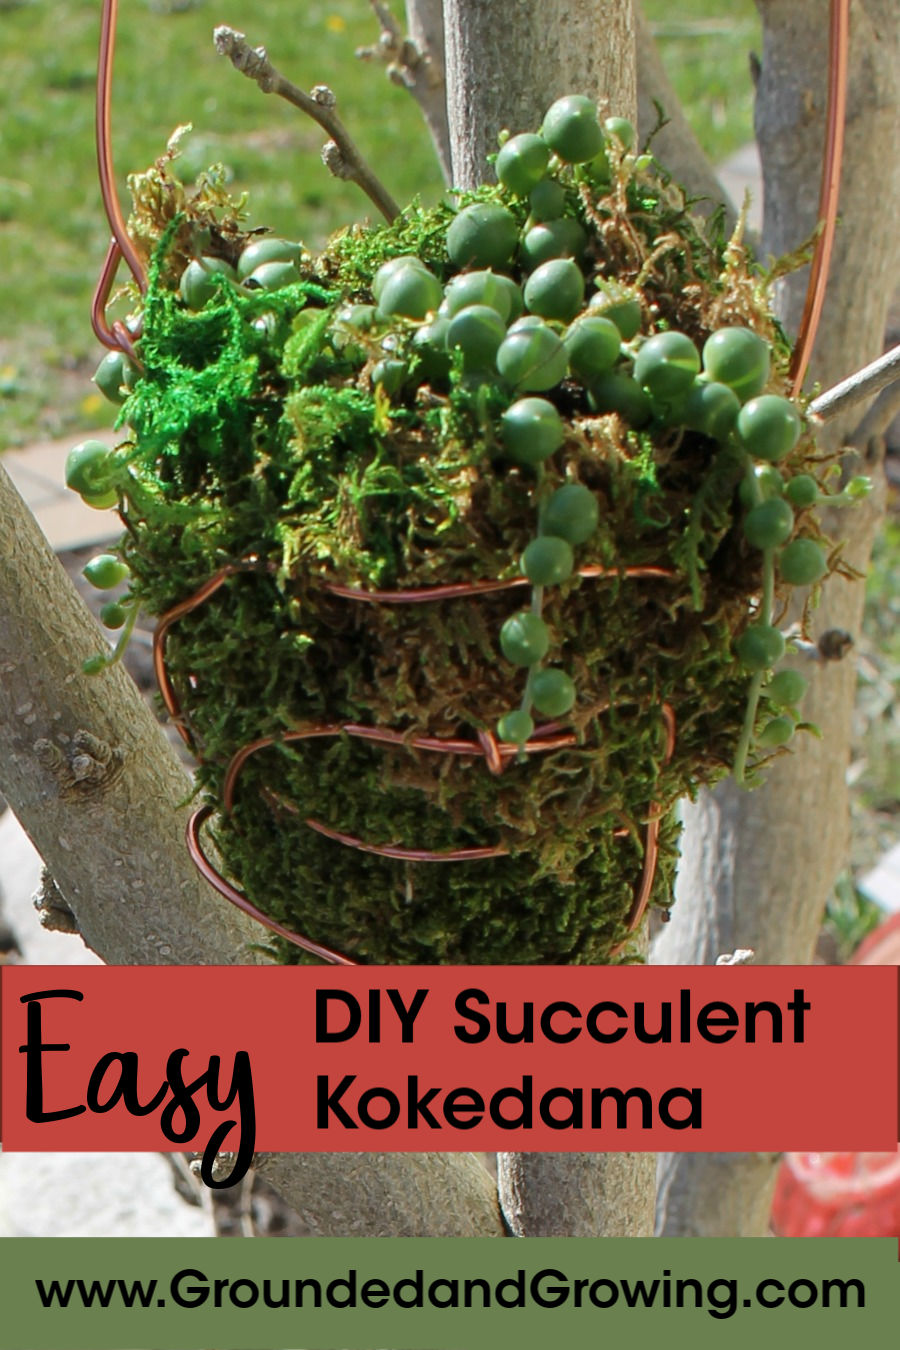 Learn the Japanese Art of Kokedama - Step By Step Tutorial